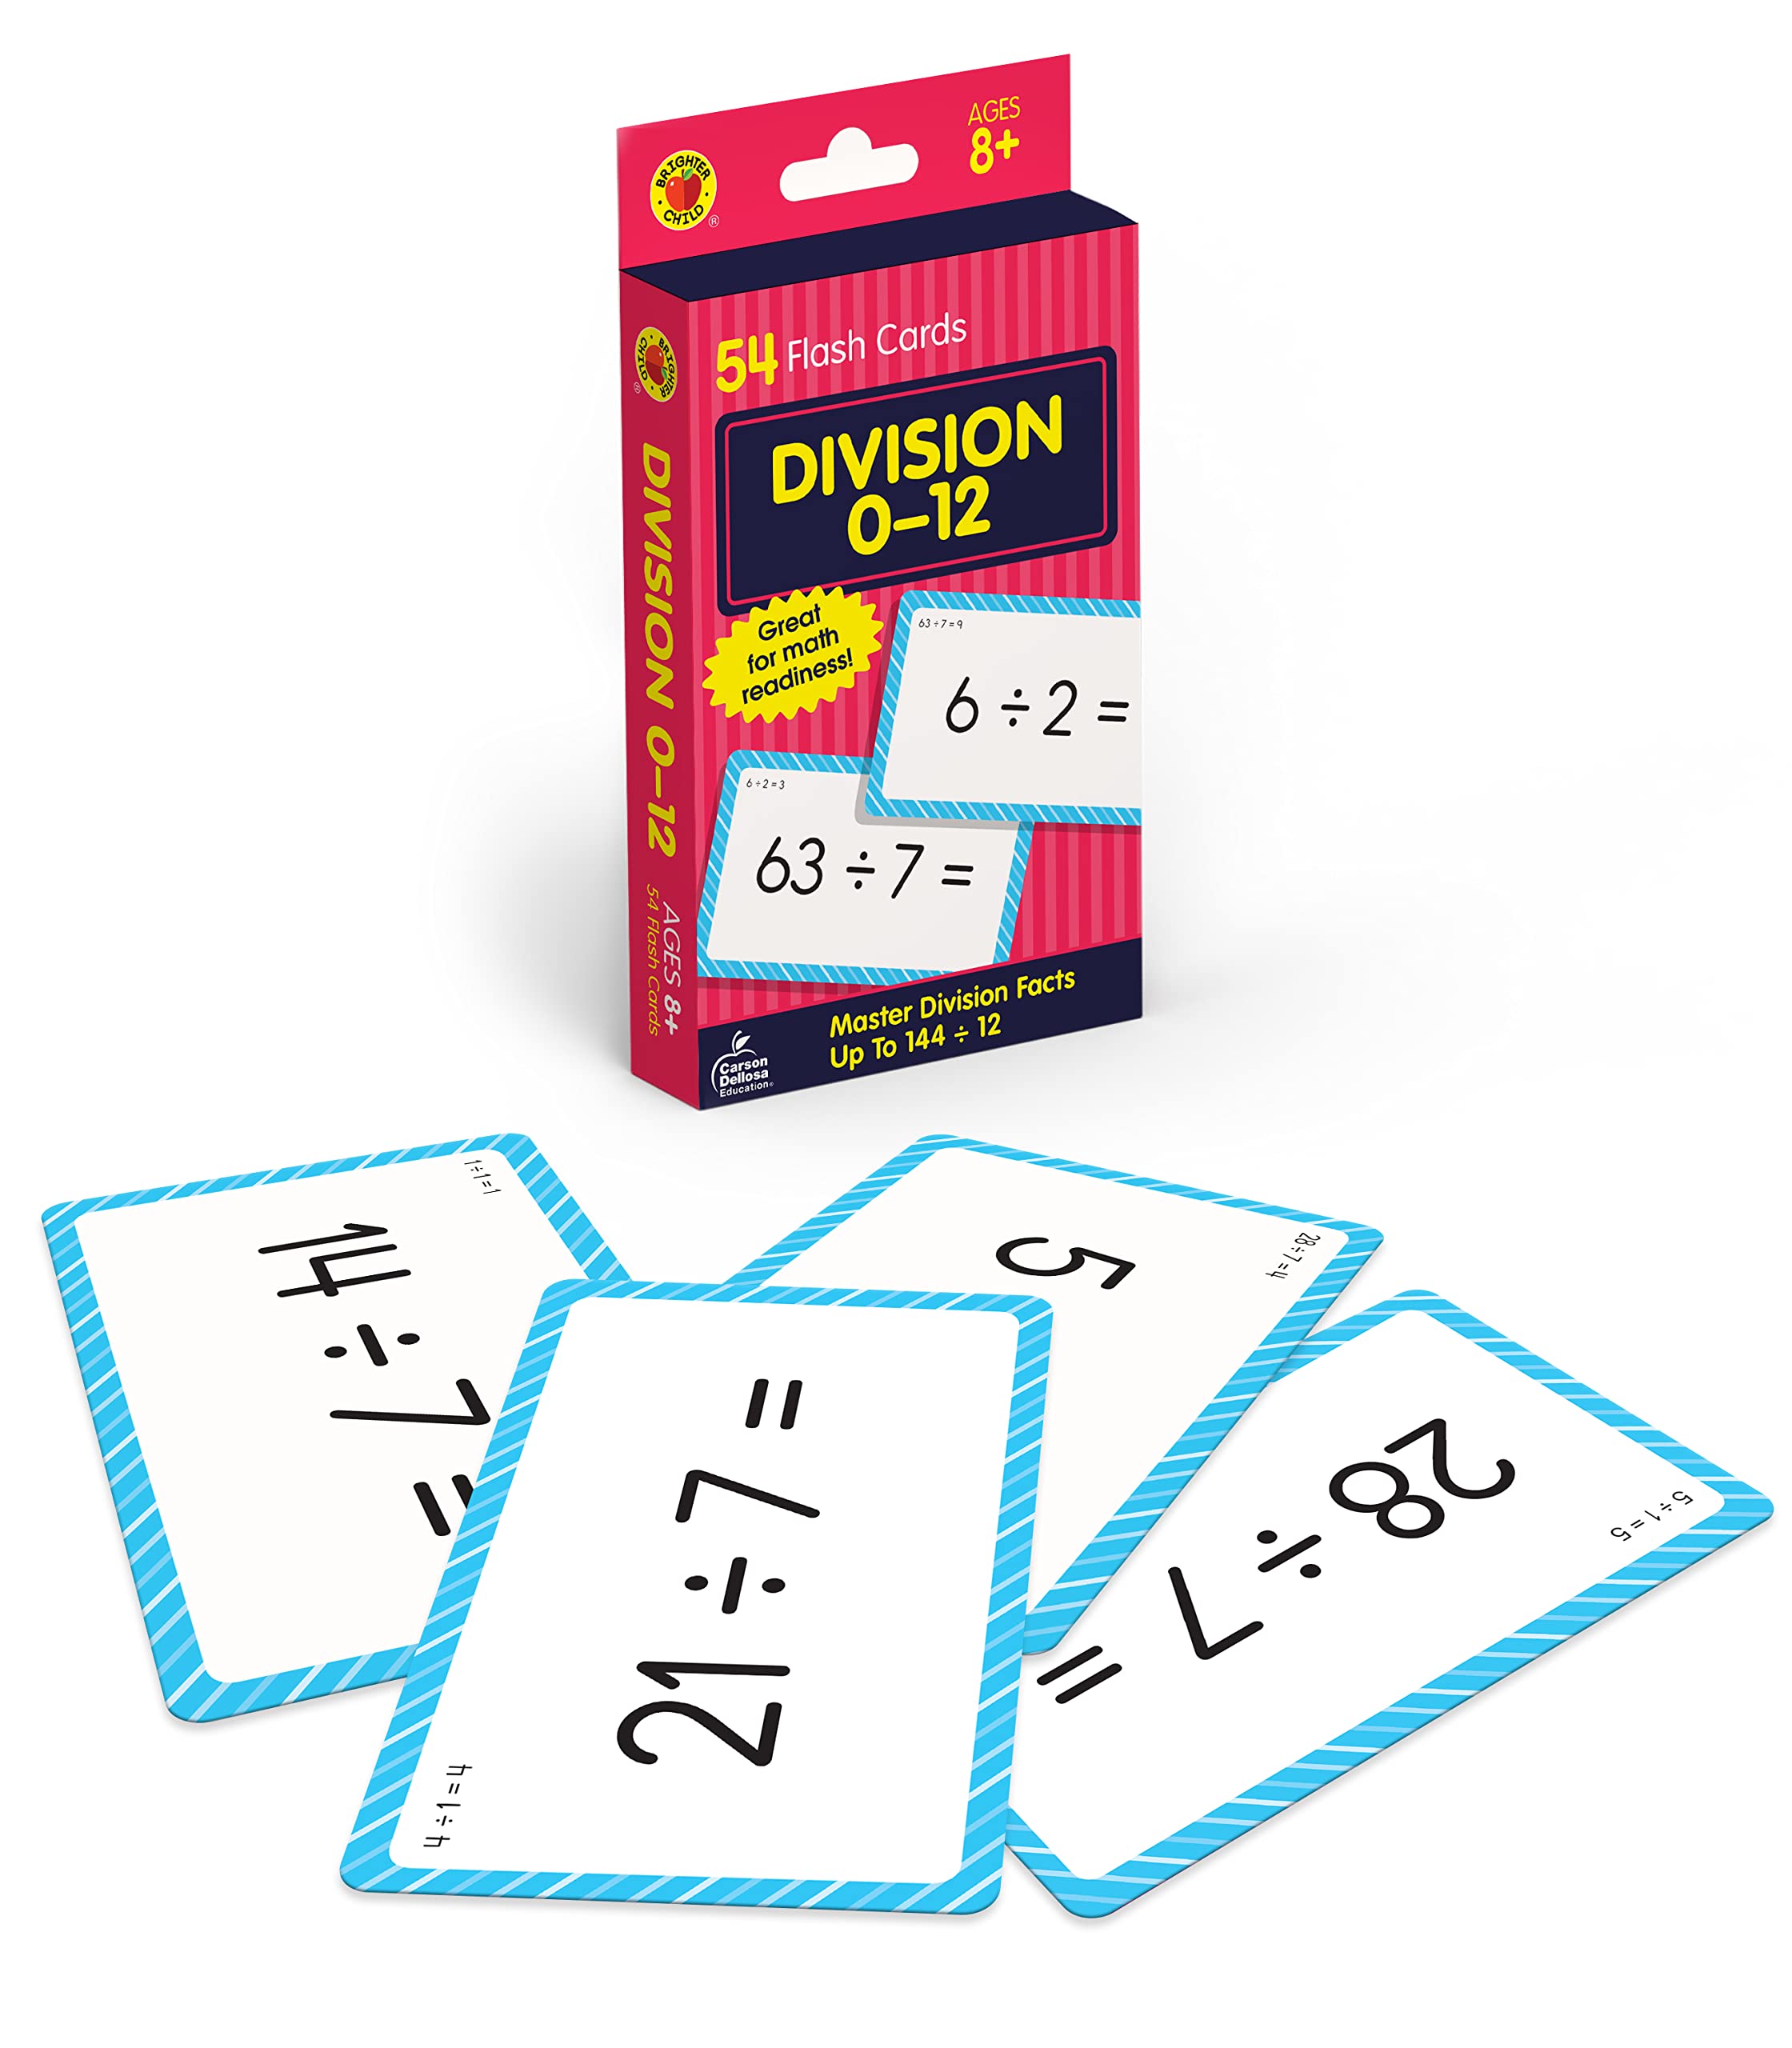 Book Cover Carson Dellosa Division Flash Cards for Kids Ages 8+, Division Flash Cards with Numbers 0-12 for 3rd Grade, 4th Grade, 5th Grade, Math Flash Cards Division